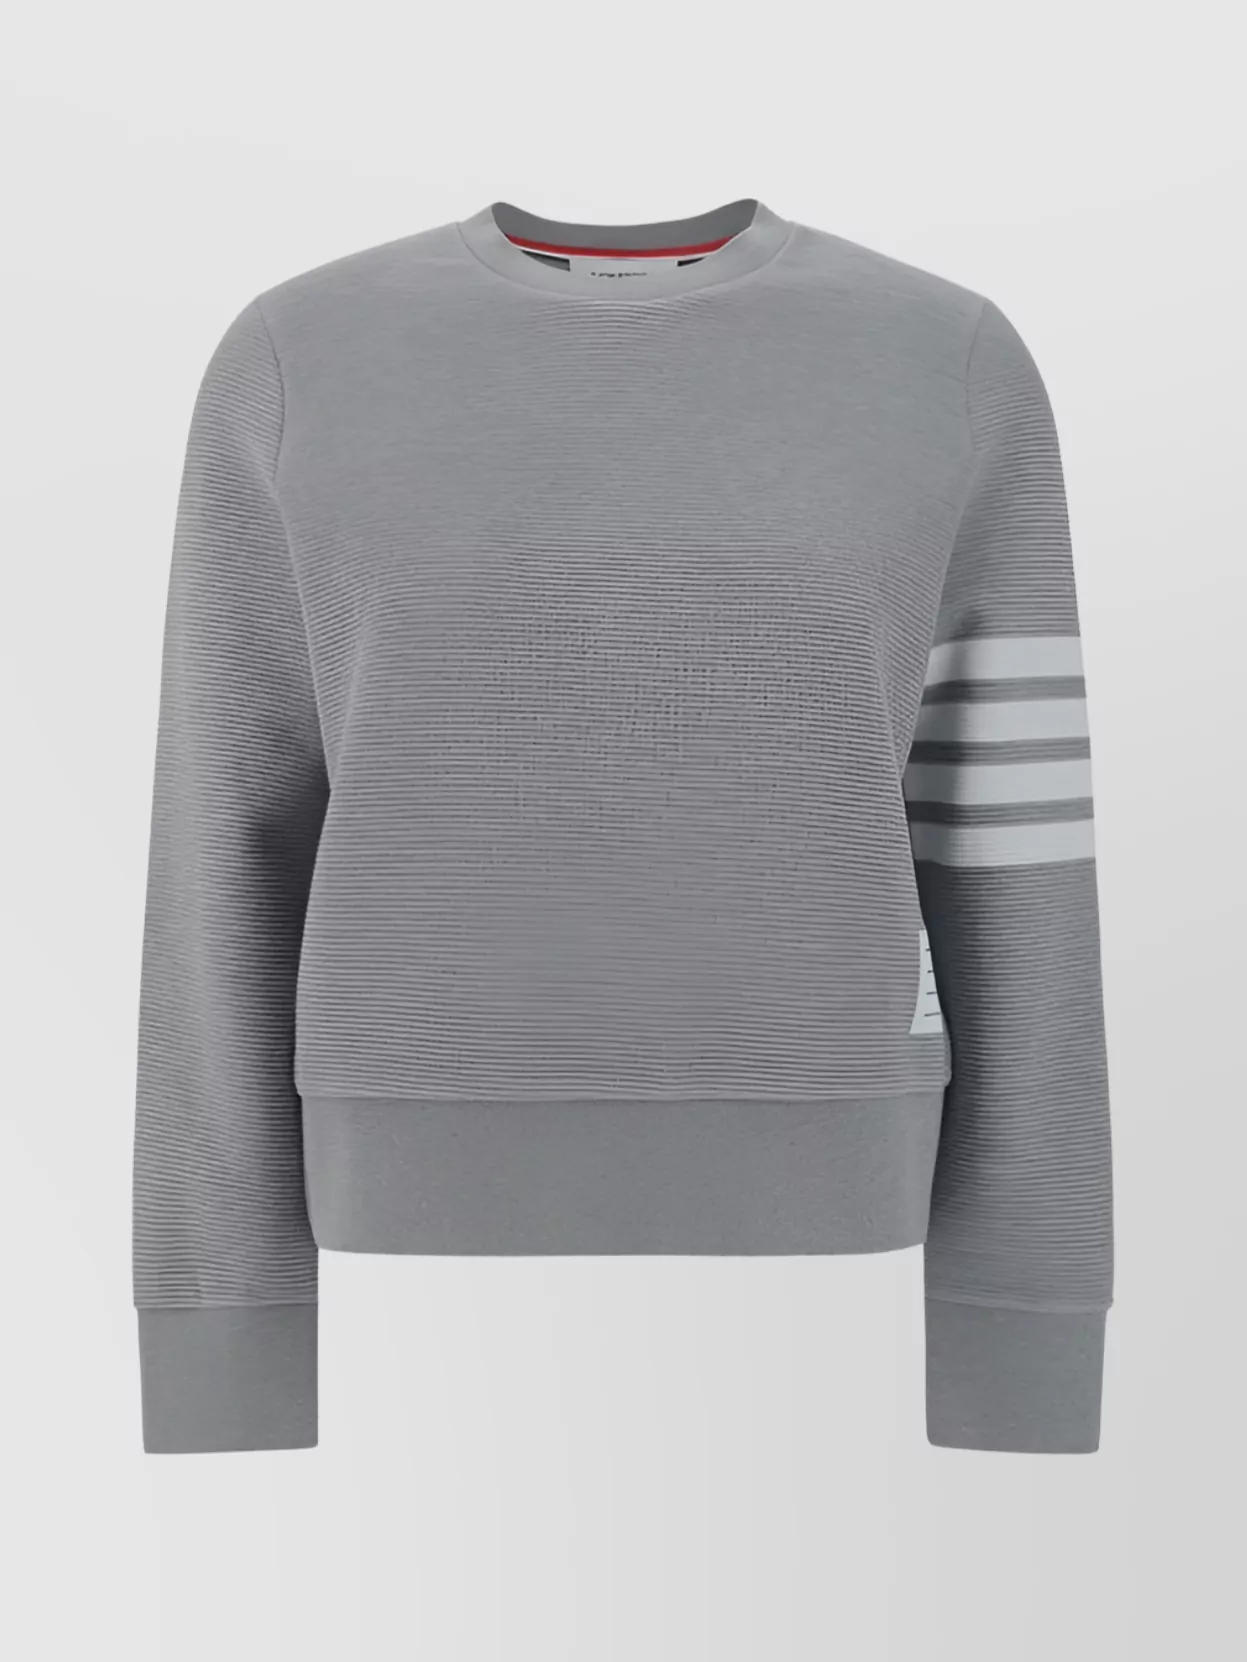 Thom Browne Front Contrast Cotton Sweatshirt In Gray